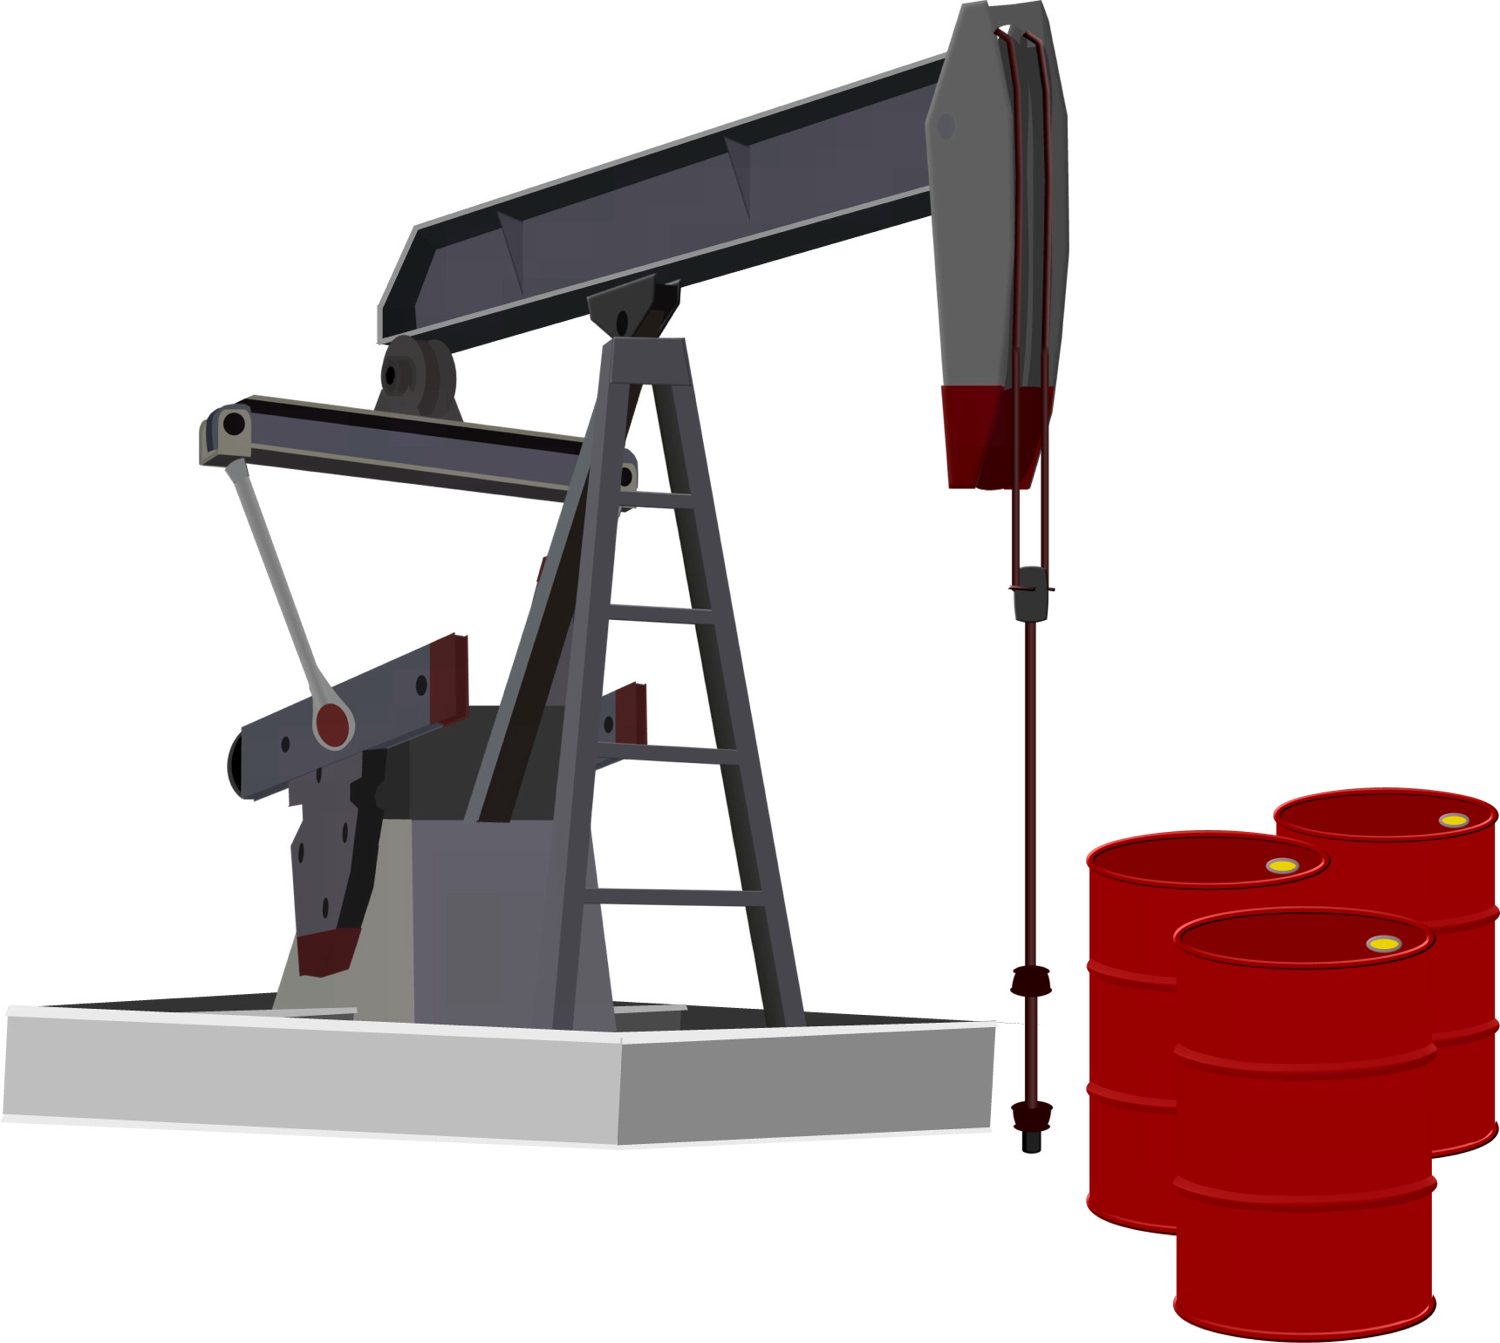 12 Oil Rig Cartoon Design Free Cliparts That You Can Download To You